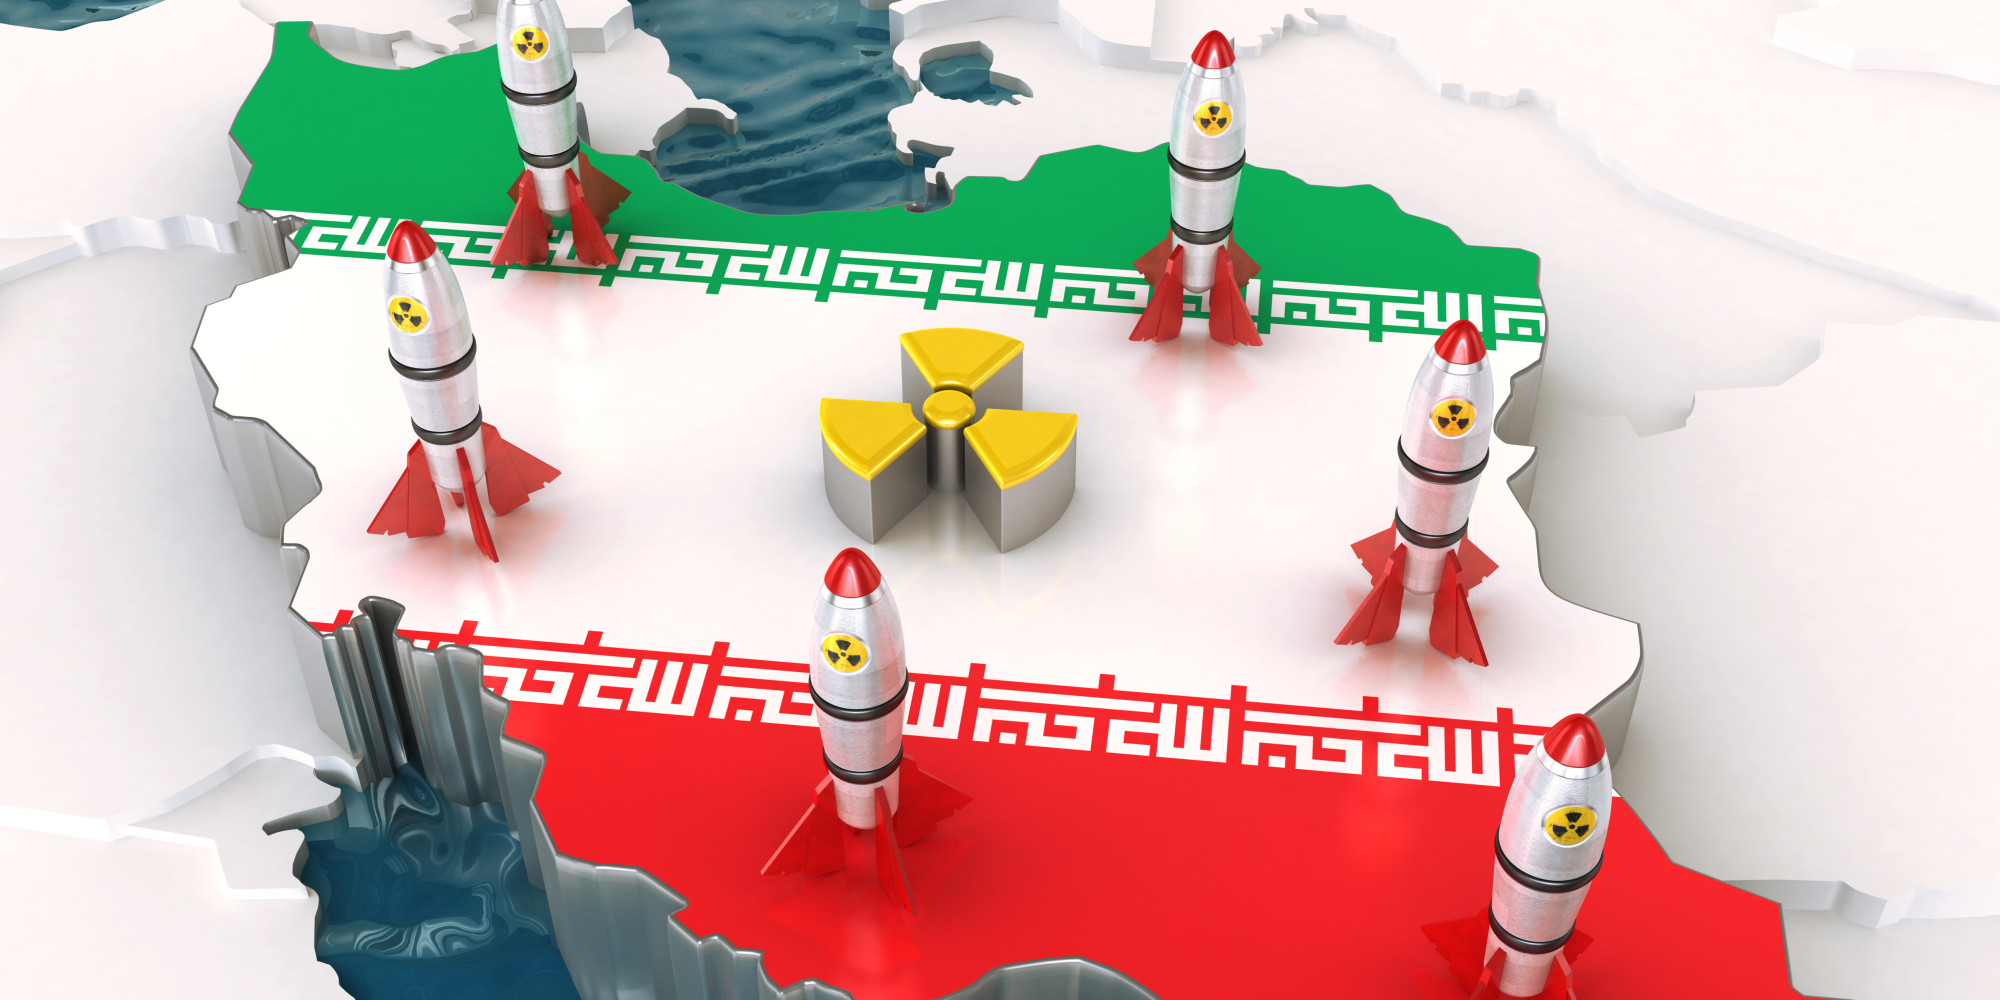 Thanks to Obama, America is two steps behind Iran in Middle East